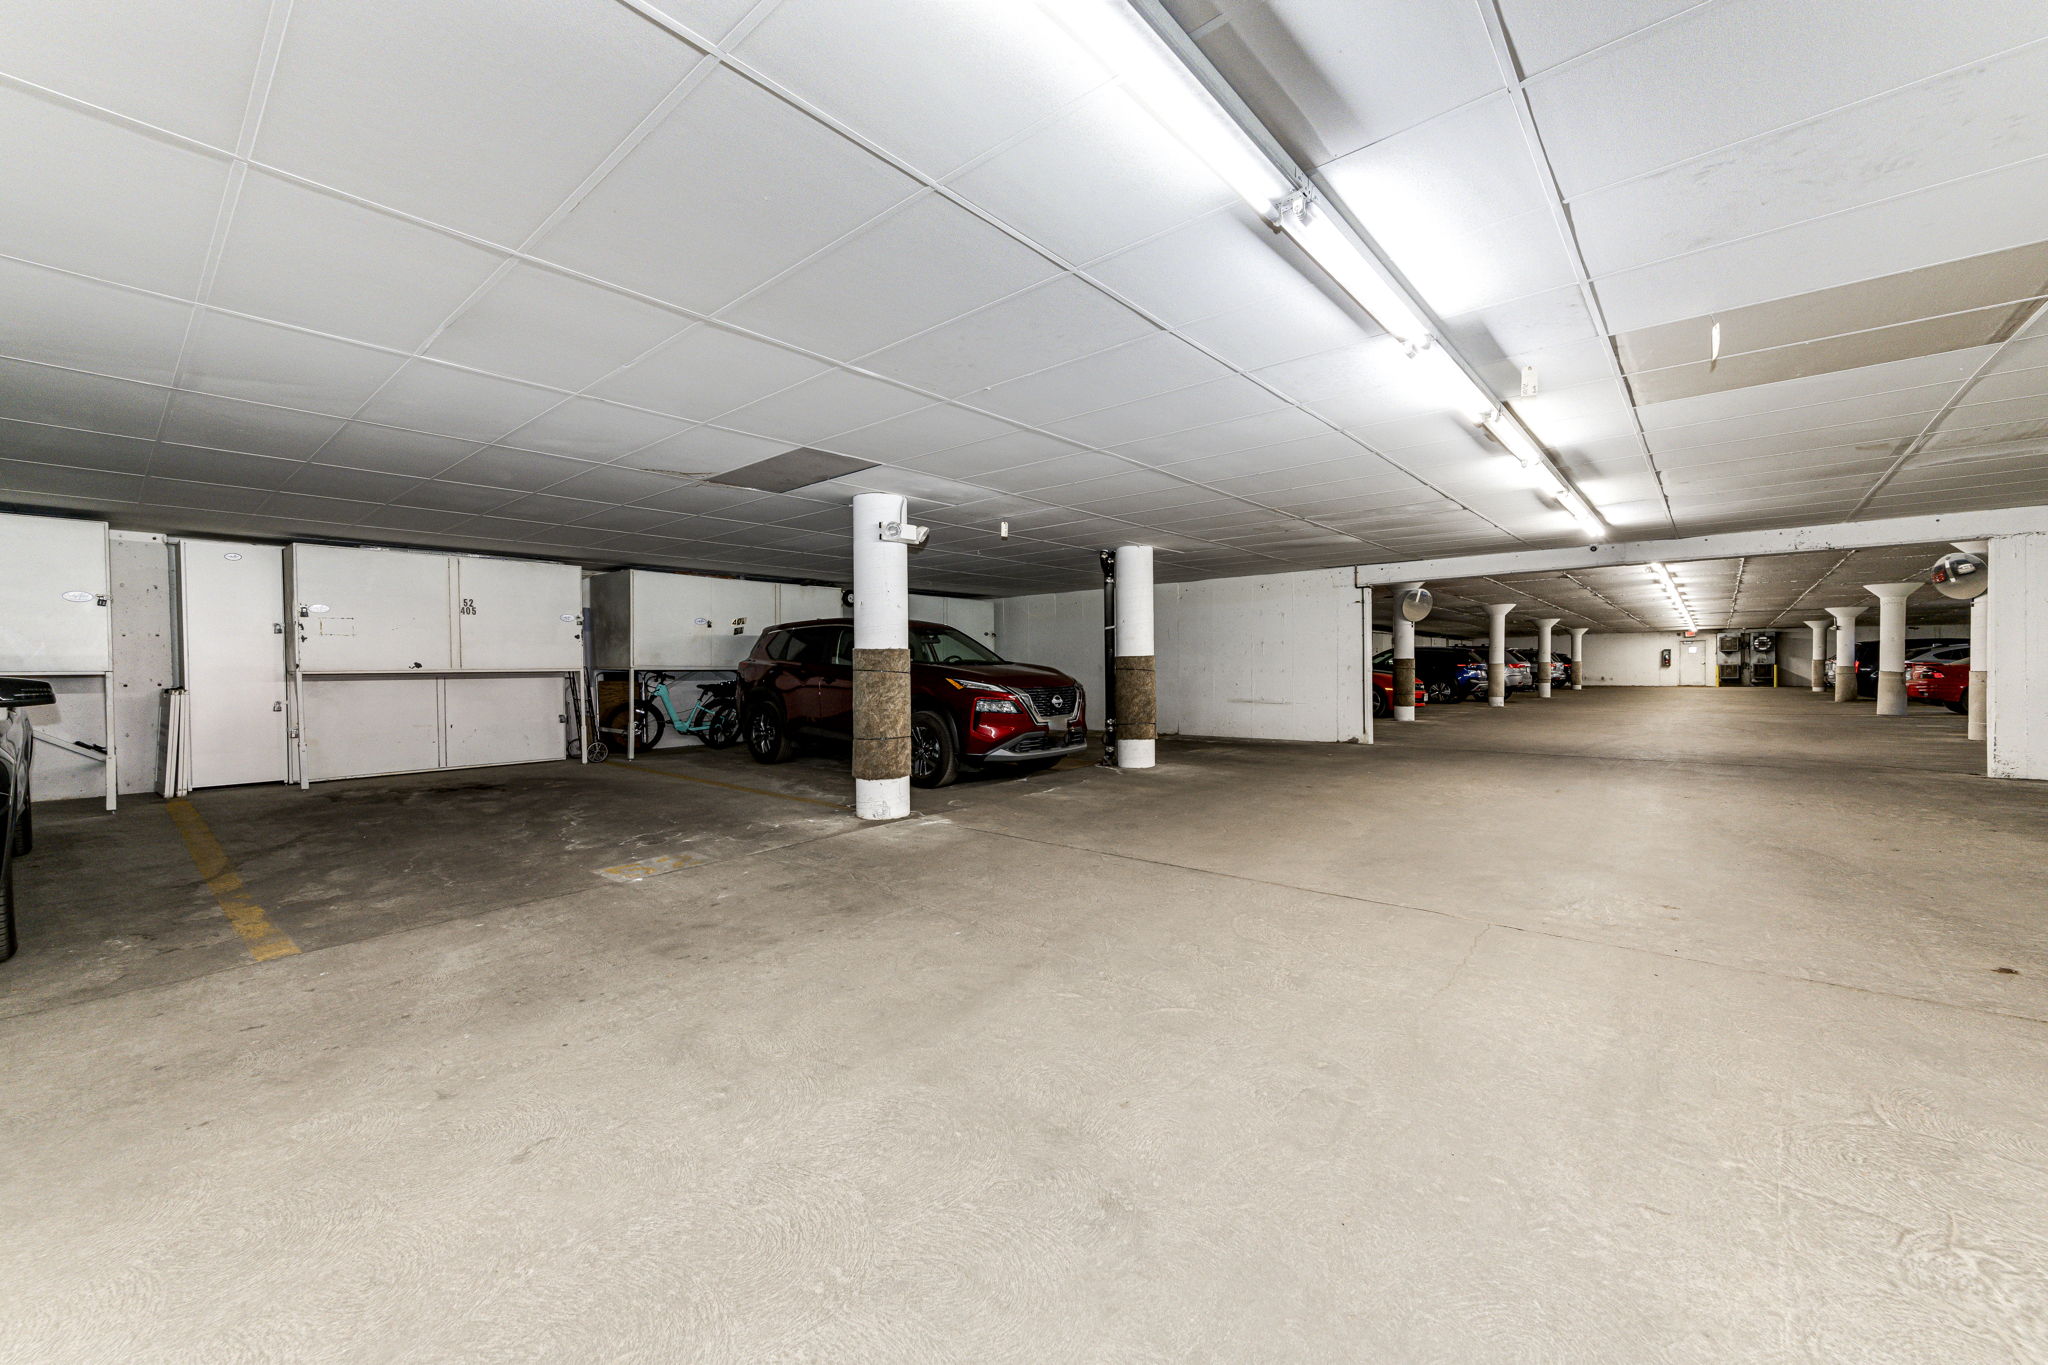 Oversized 1-car parking spot #52 with additional storage